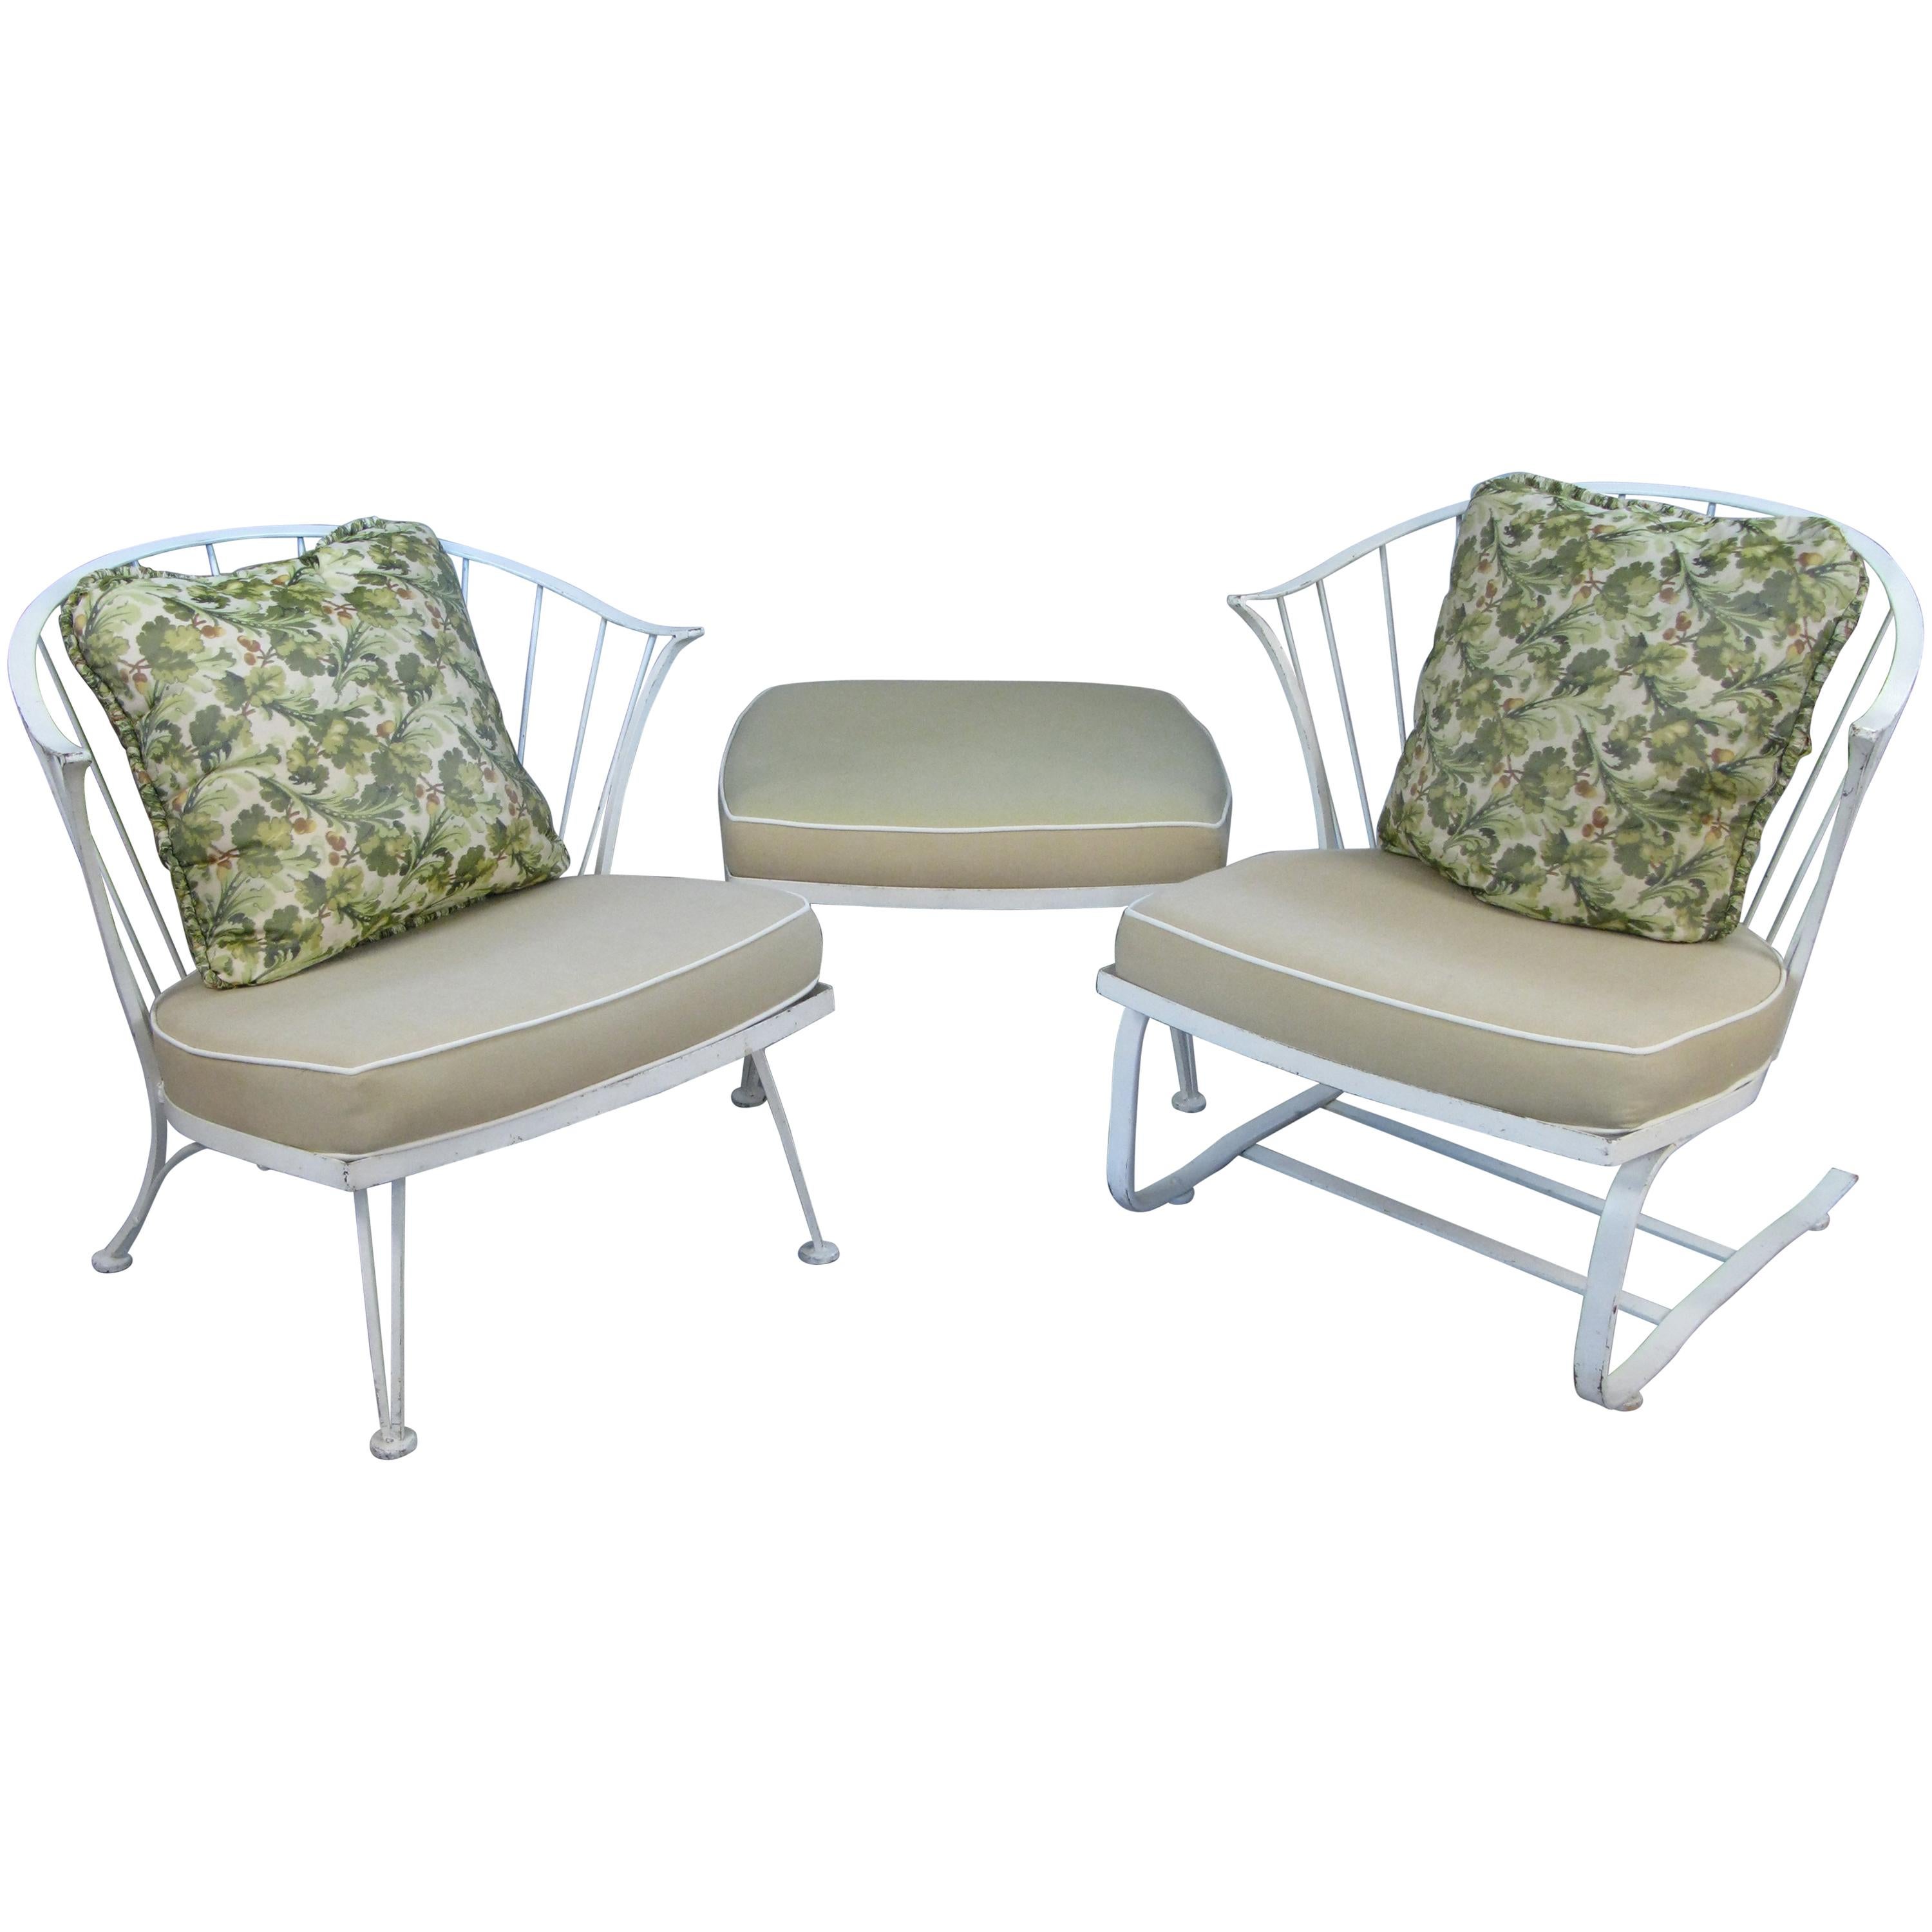 Vintage Pinecrest Lounge Chairs and Ottoman by Woodard